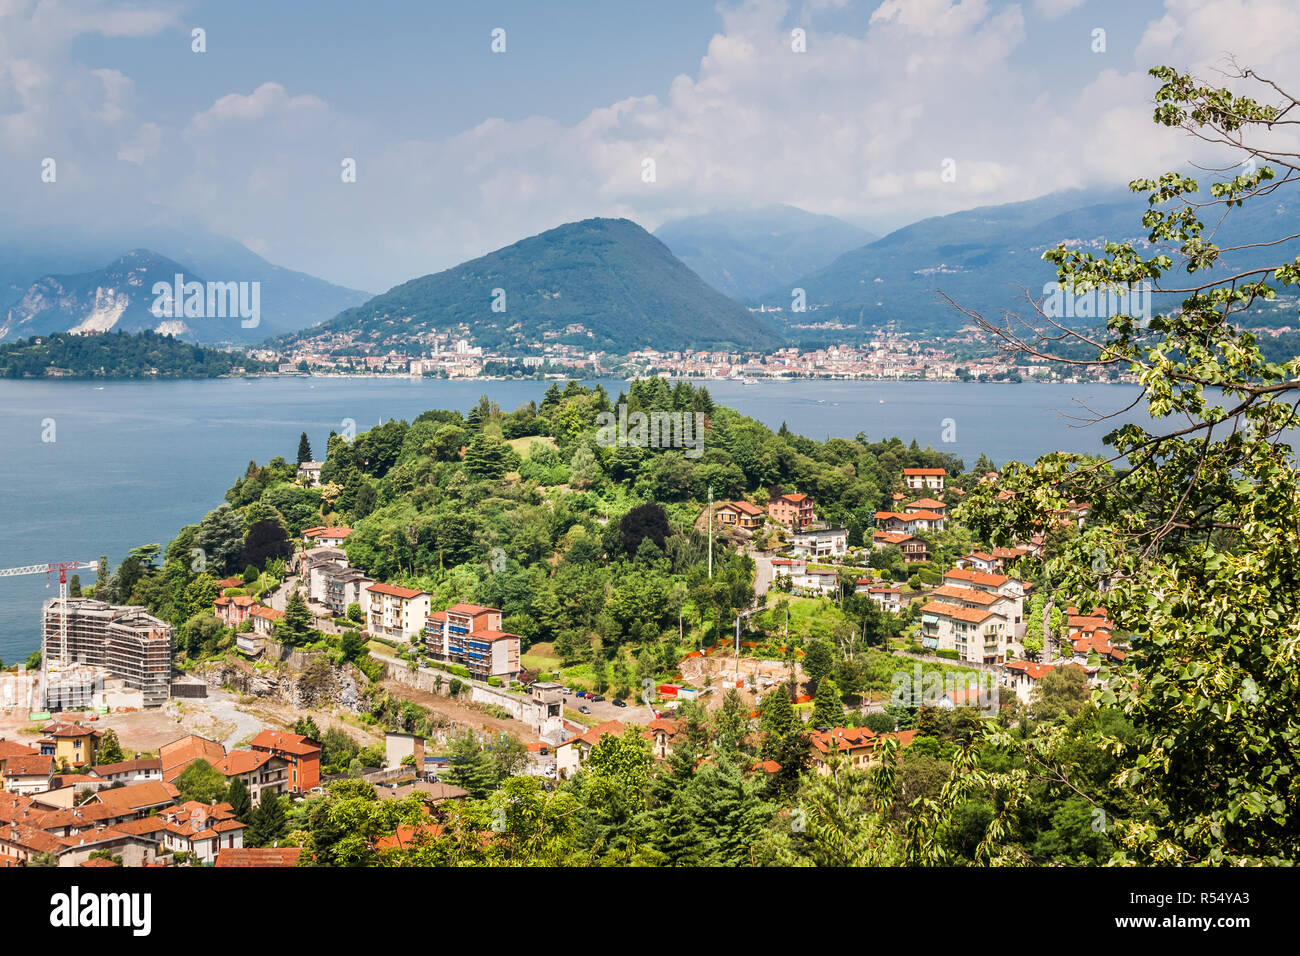 Aerial view of Laveno, Lombardy, Italy, on the edge of Lake Maggiore. Stock Photo